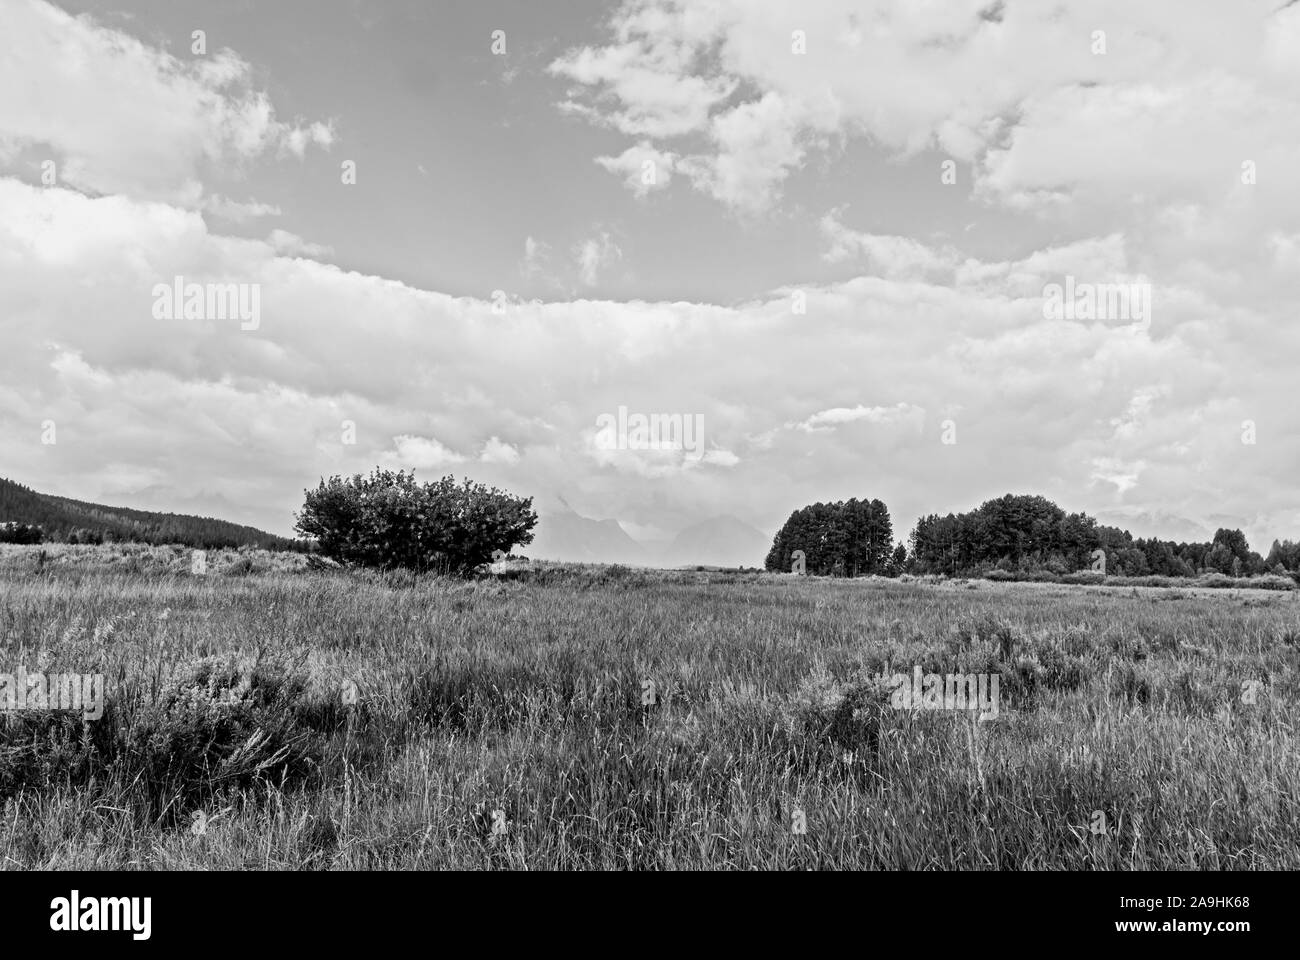 Meadows with trees under skies with white fluffy clouds. Stock Photo